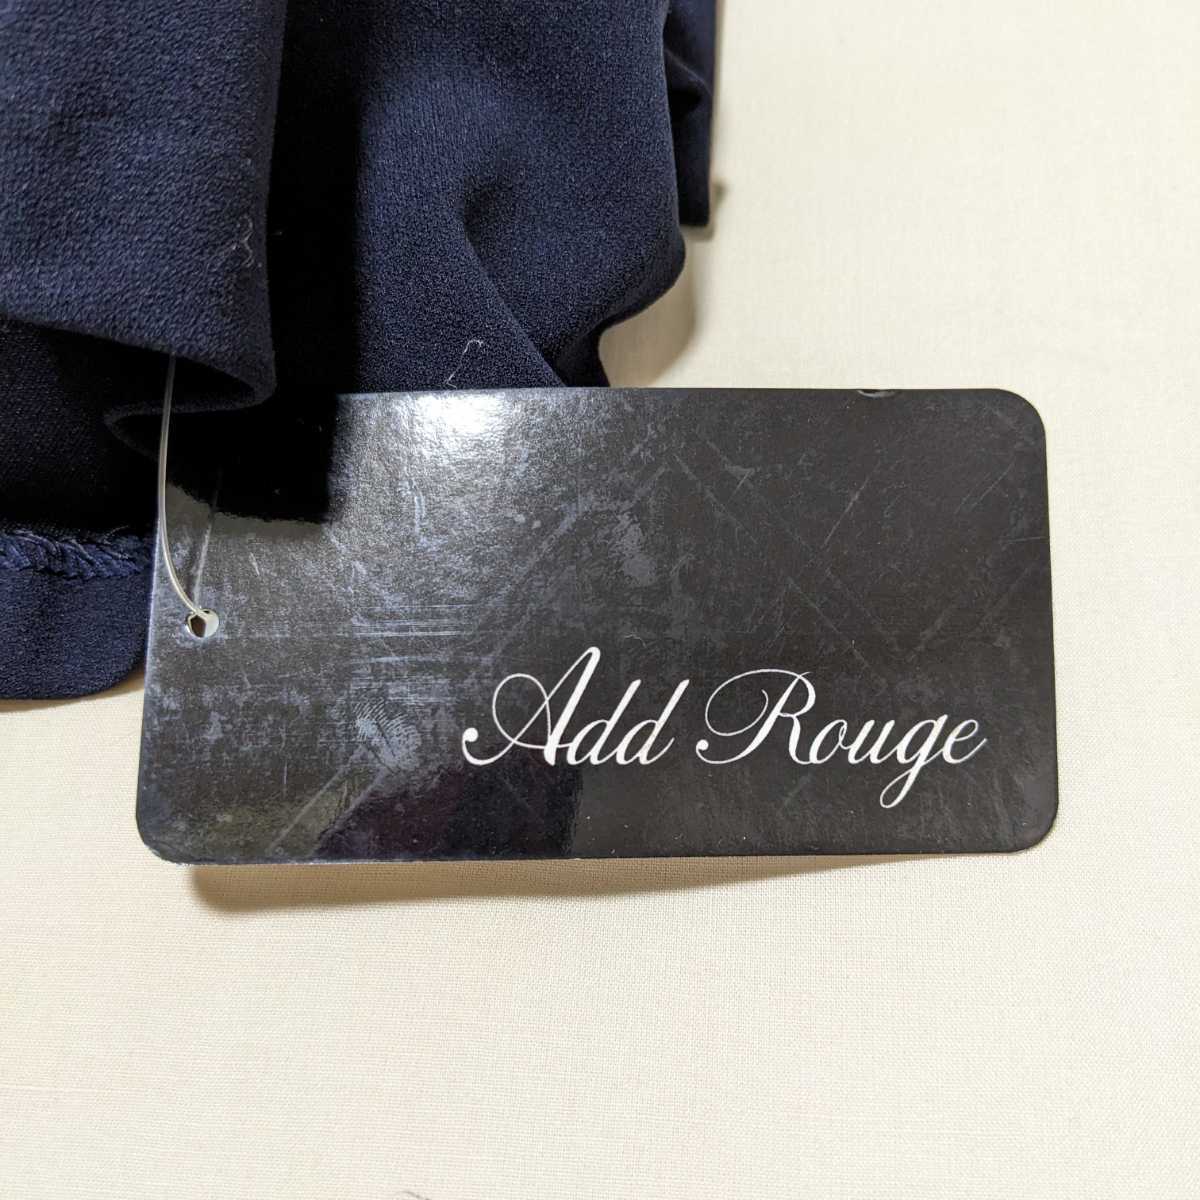 +FP40 new goods unused AddRougeado rouge formal lady's 15 number 15ABR 7 minute sleeve cut and sewn pull over navy blue business ceremony 